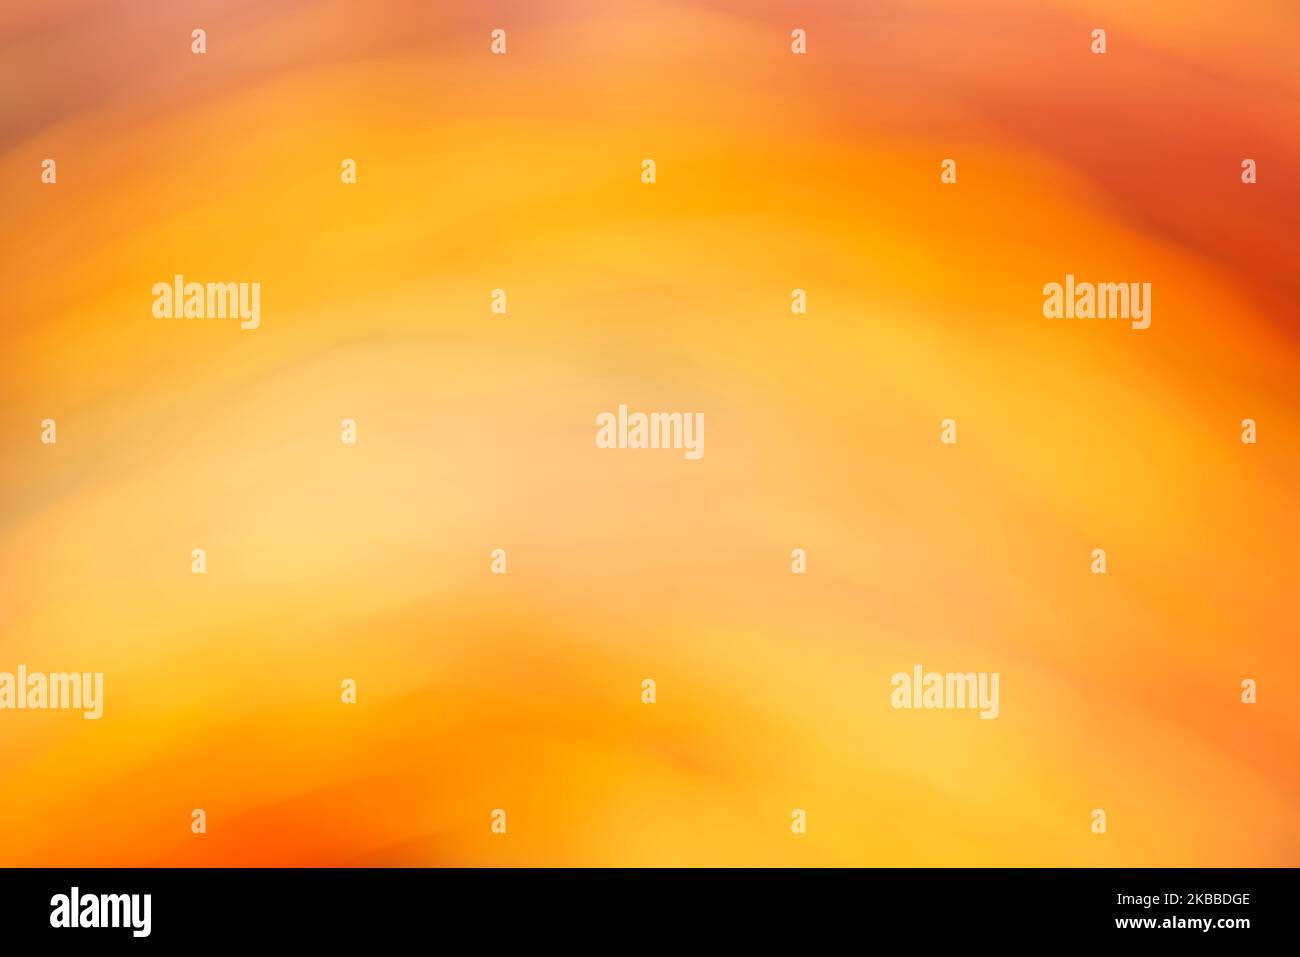 Artistic abstract warm background in vivid orange and yellow colors. Smooth and flowing design, modern and vibrant. Stock Photo